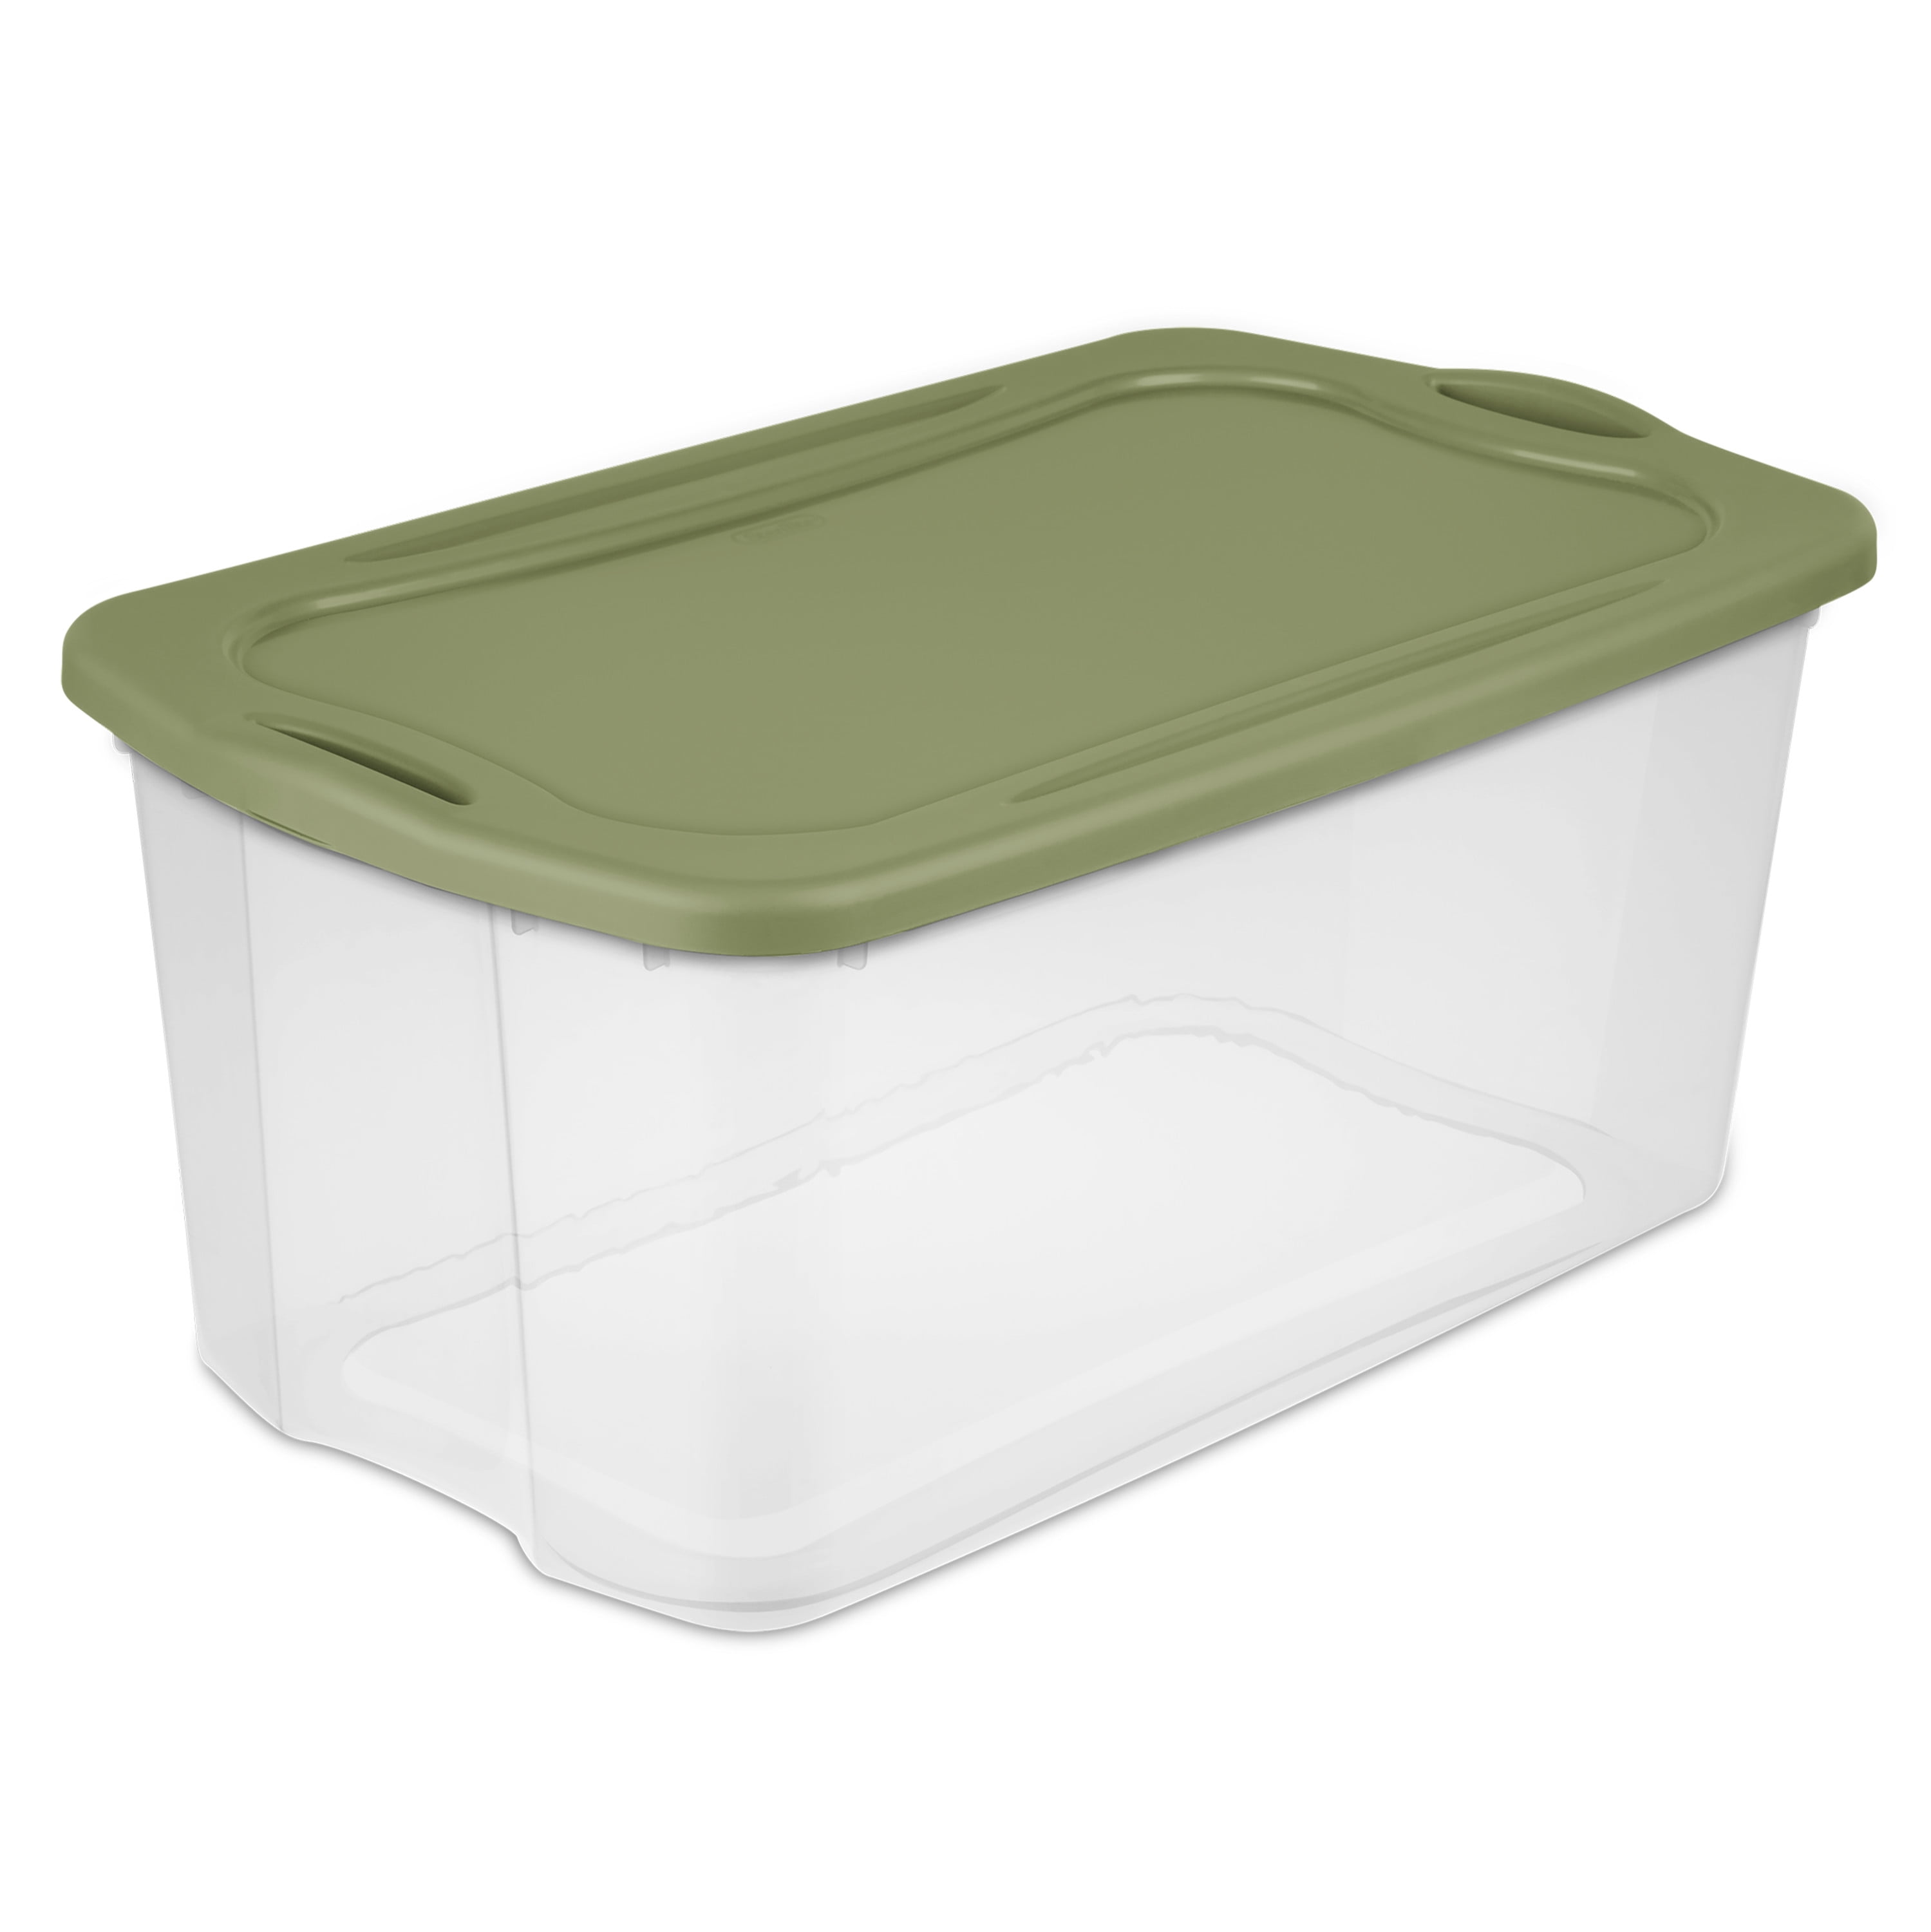 2 Gallon EZ Stor® Plastic Container with Handle